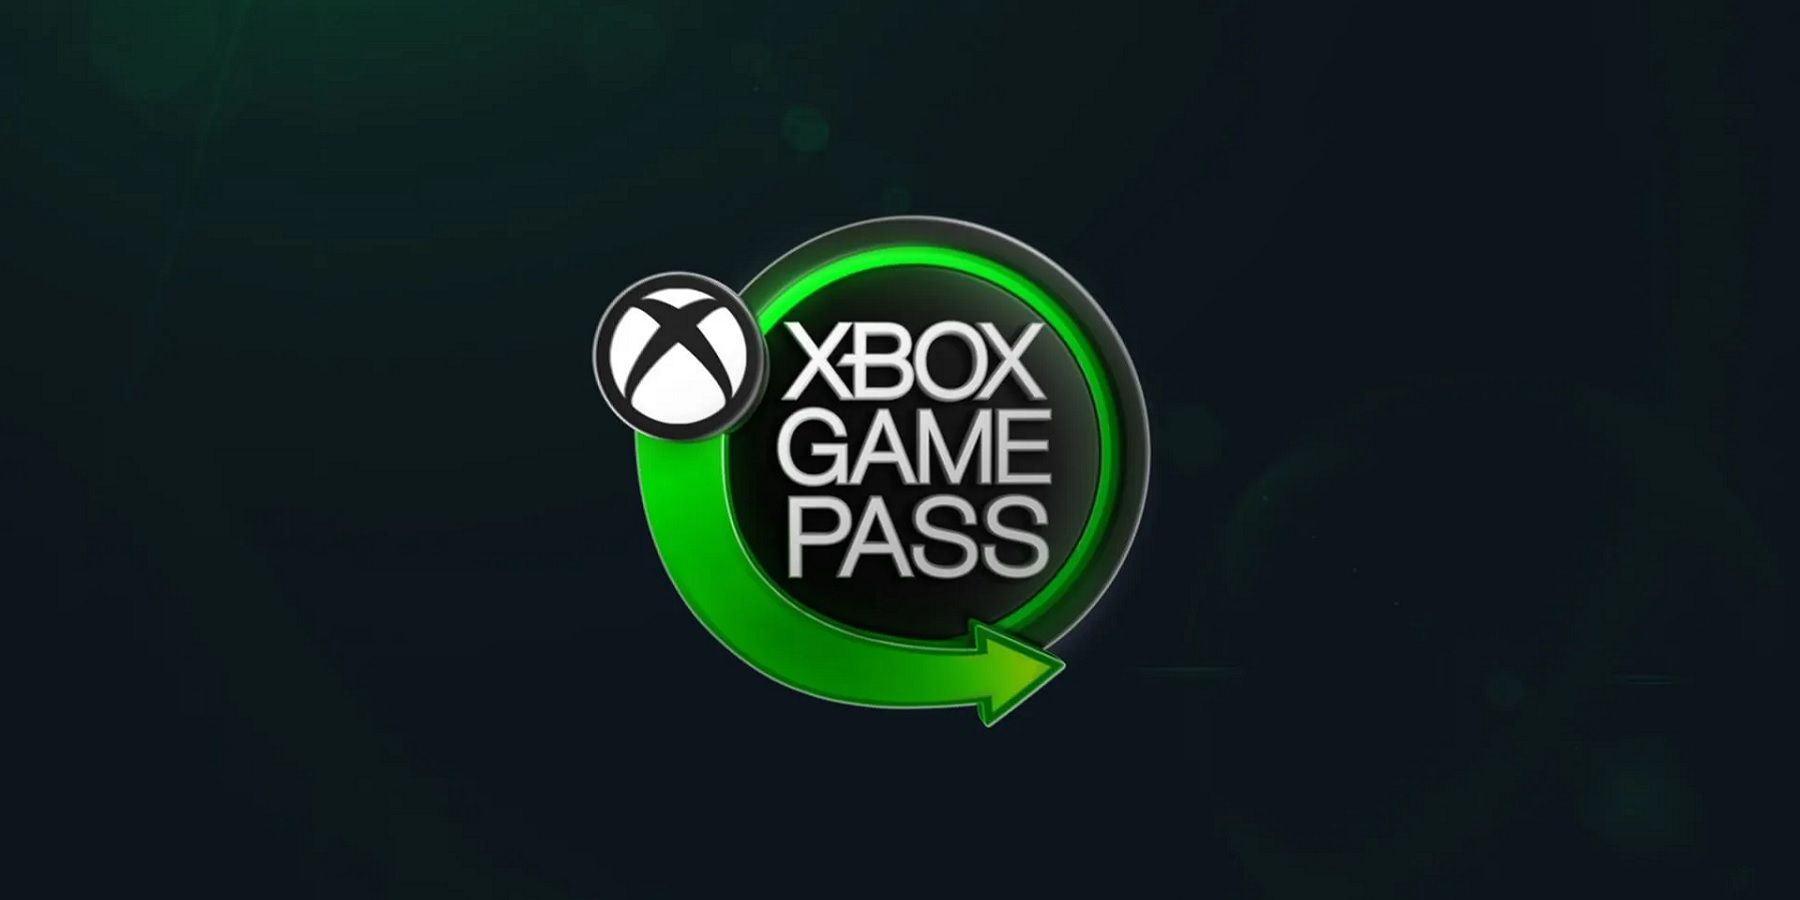 Coming Soon to Game Pass: Midnight Fight Express, Prodeus, Ghost